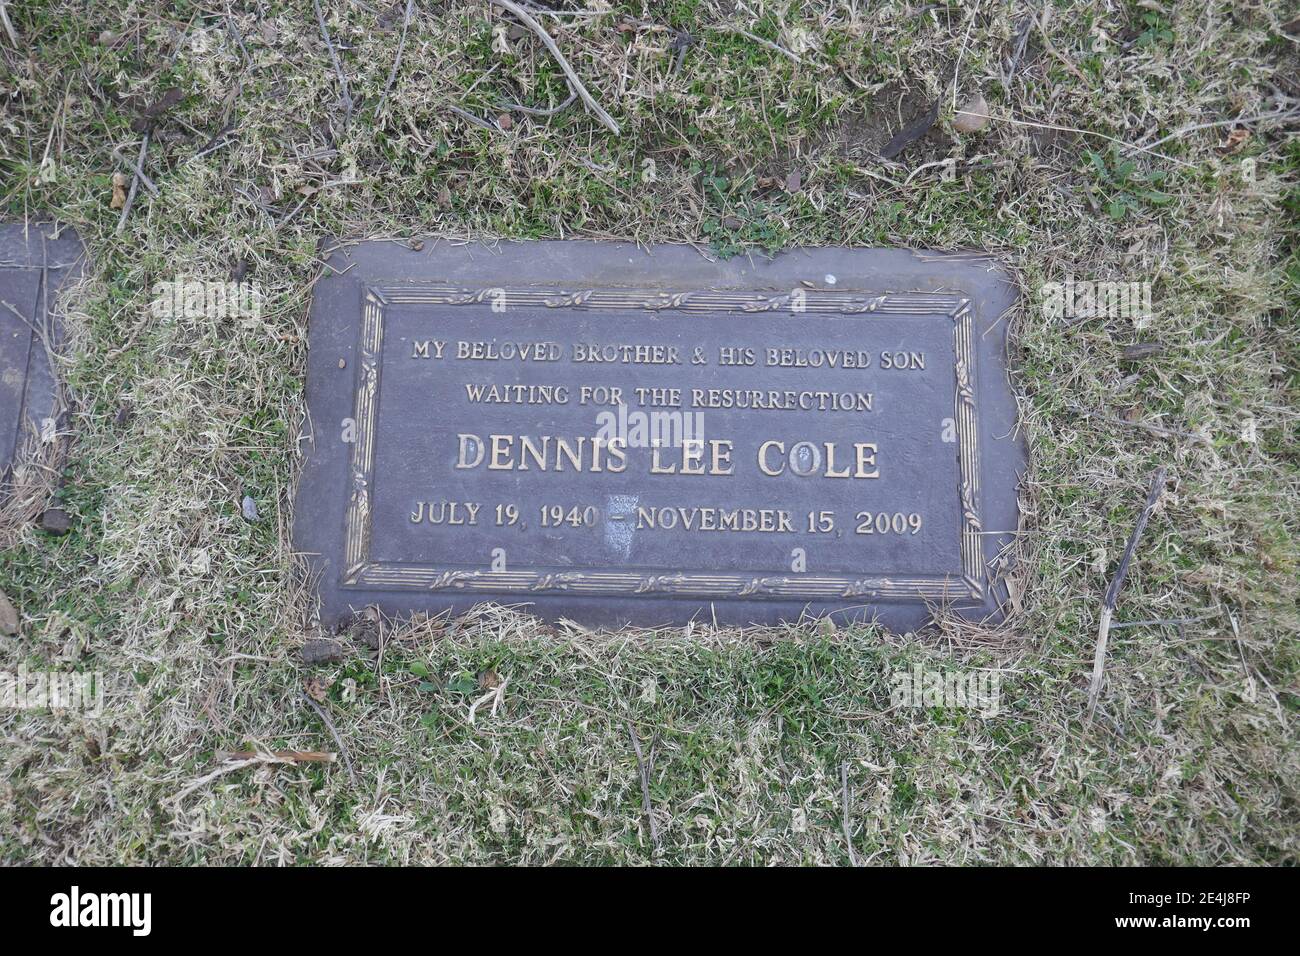 Los Angeles, California, USA 21st January 2021 A general view of atmosphere of actor Dennis Cole's Grave at Forest Lawn Memorial Park Hollywood Hills on January 21, 2021 in Los Angeles, California, USA. Photo by Barry King/Alamy Stock Photo Stock Photo